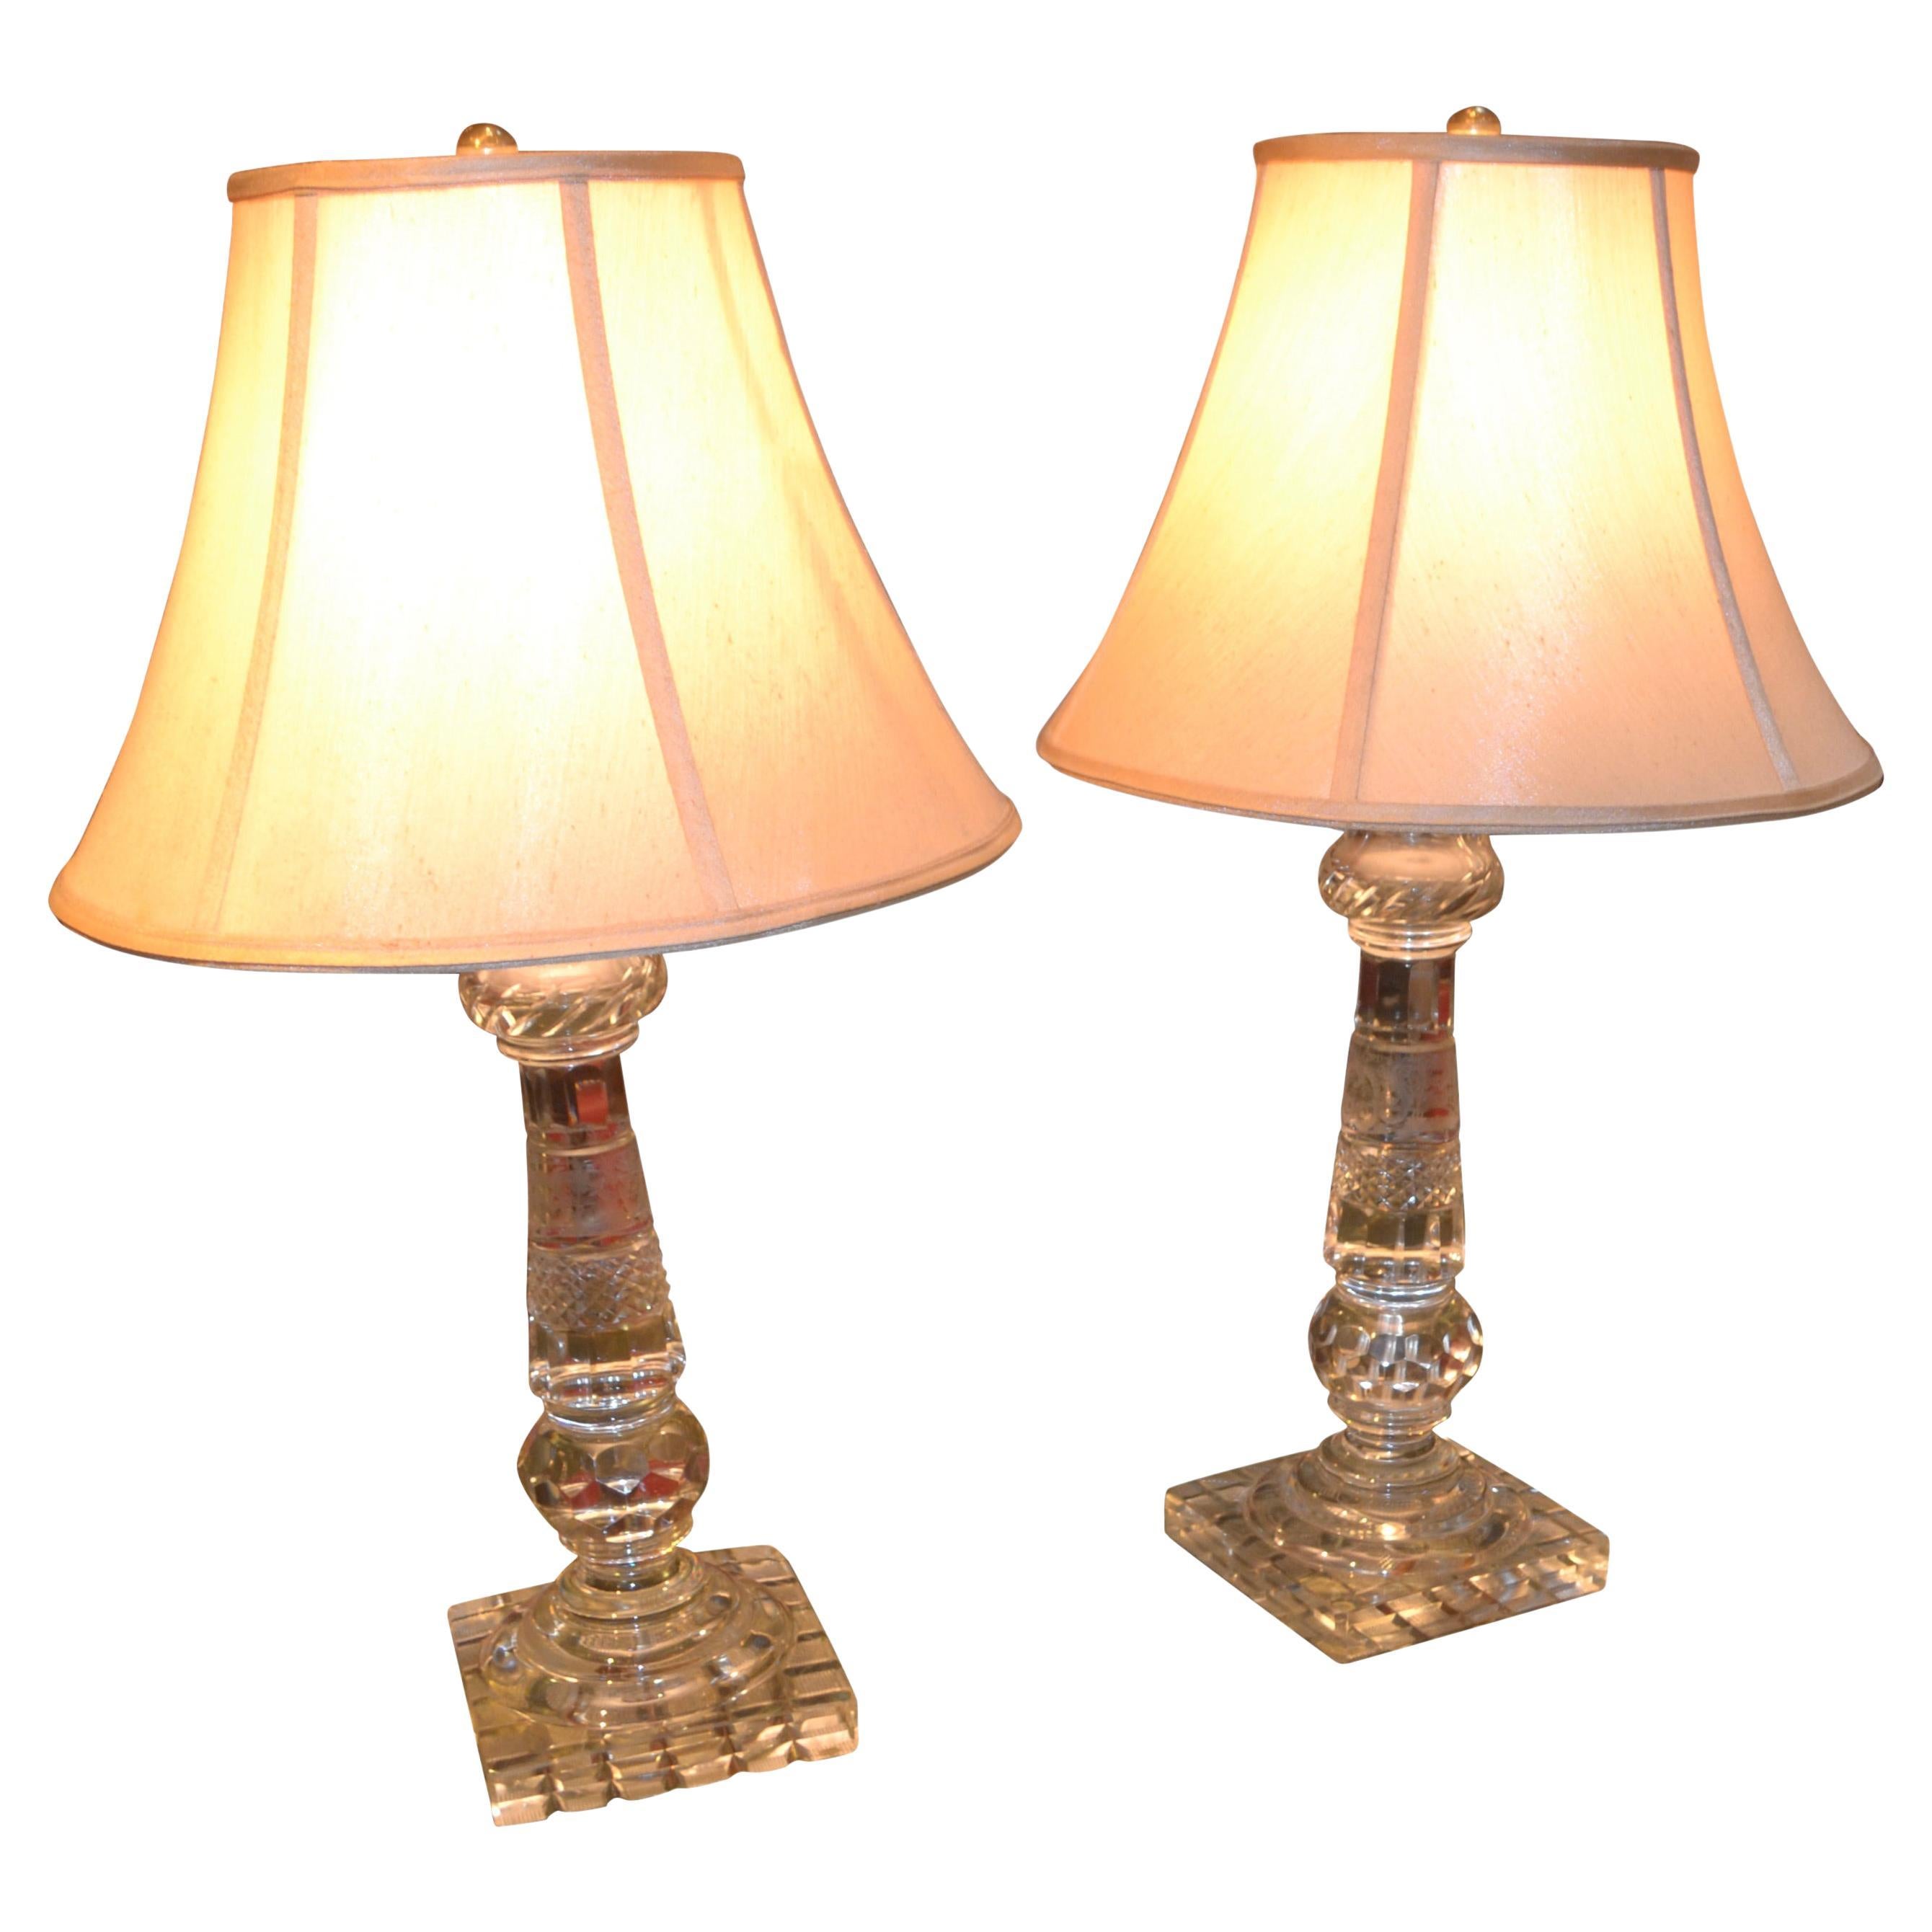 A pair of heavily cut crystal lamp bases; the stems cut in various designs; the bottom of the rectangular bases are also heavily cut.